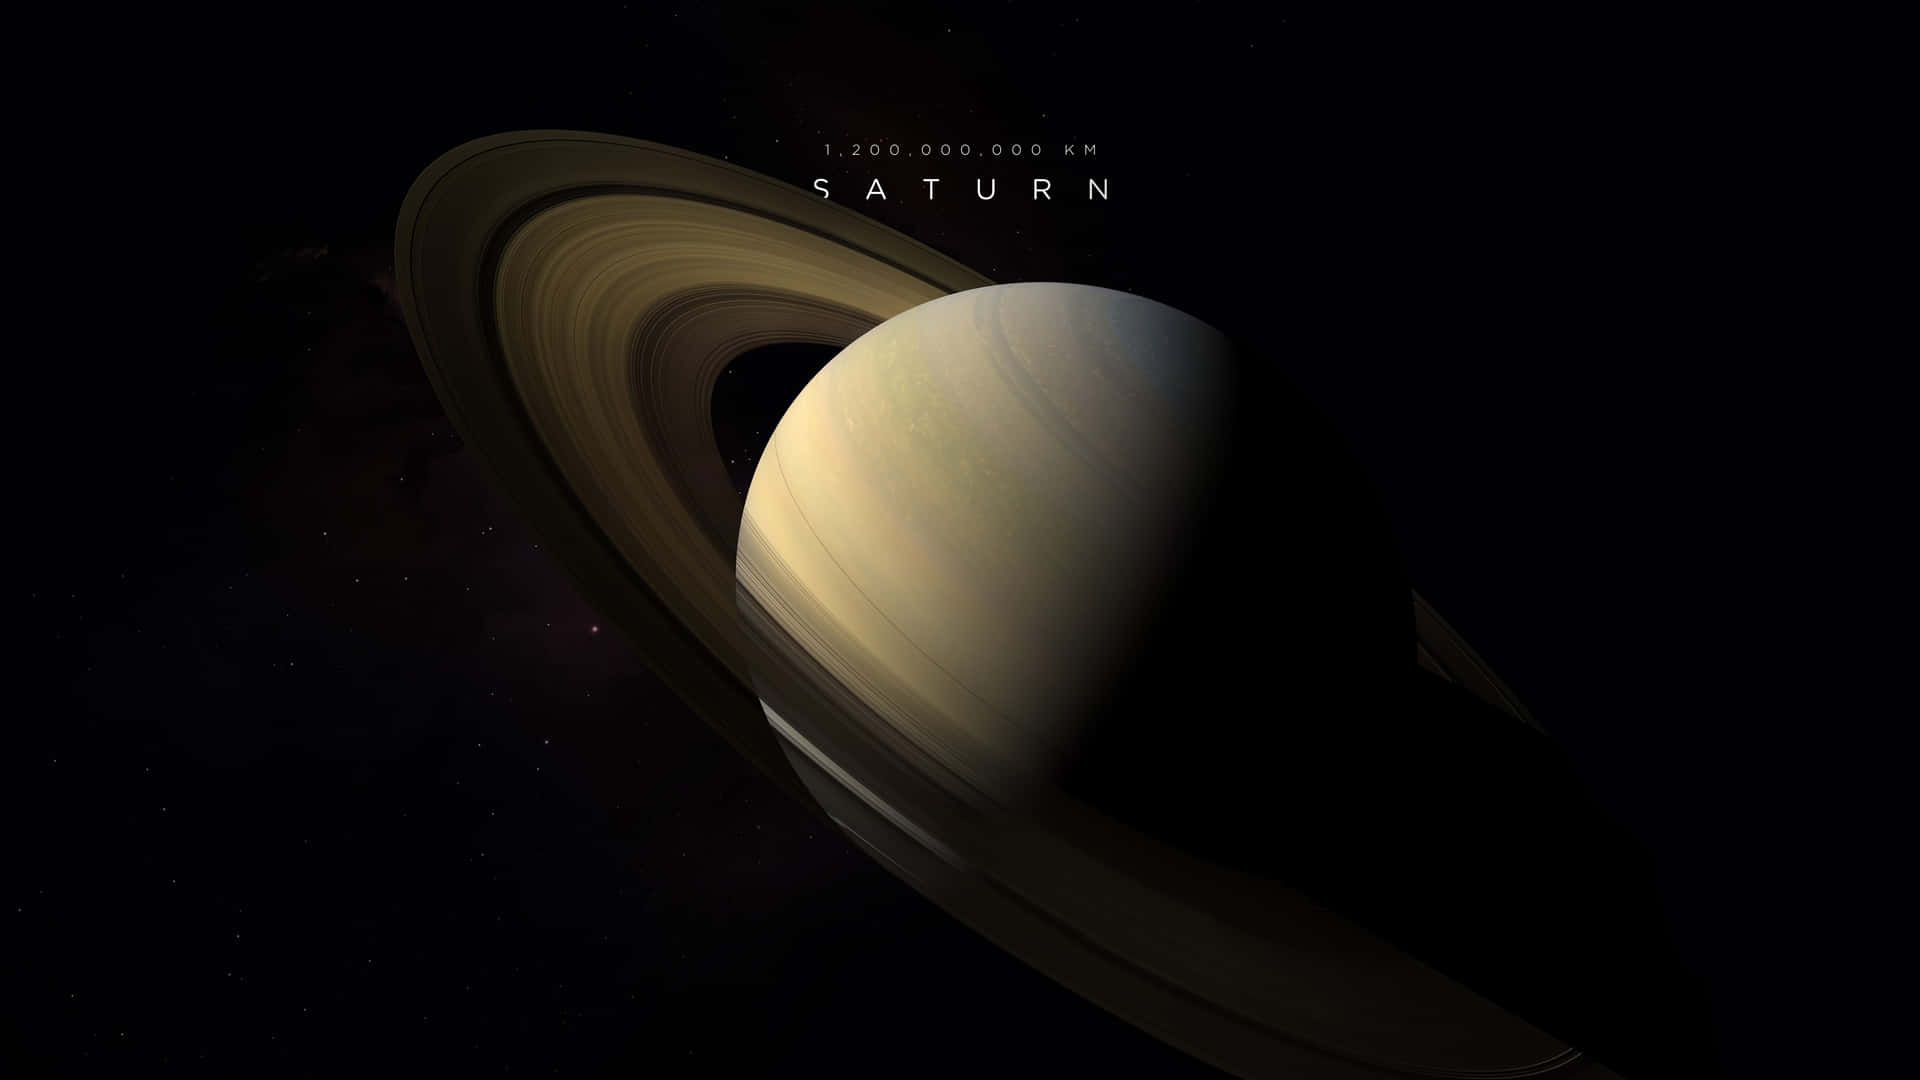 The Ringed Beauty of Saturn